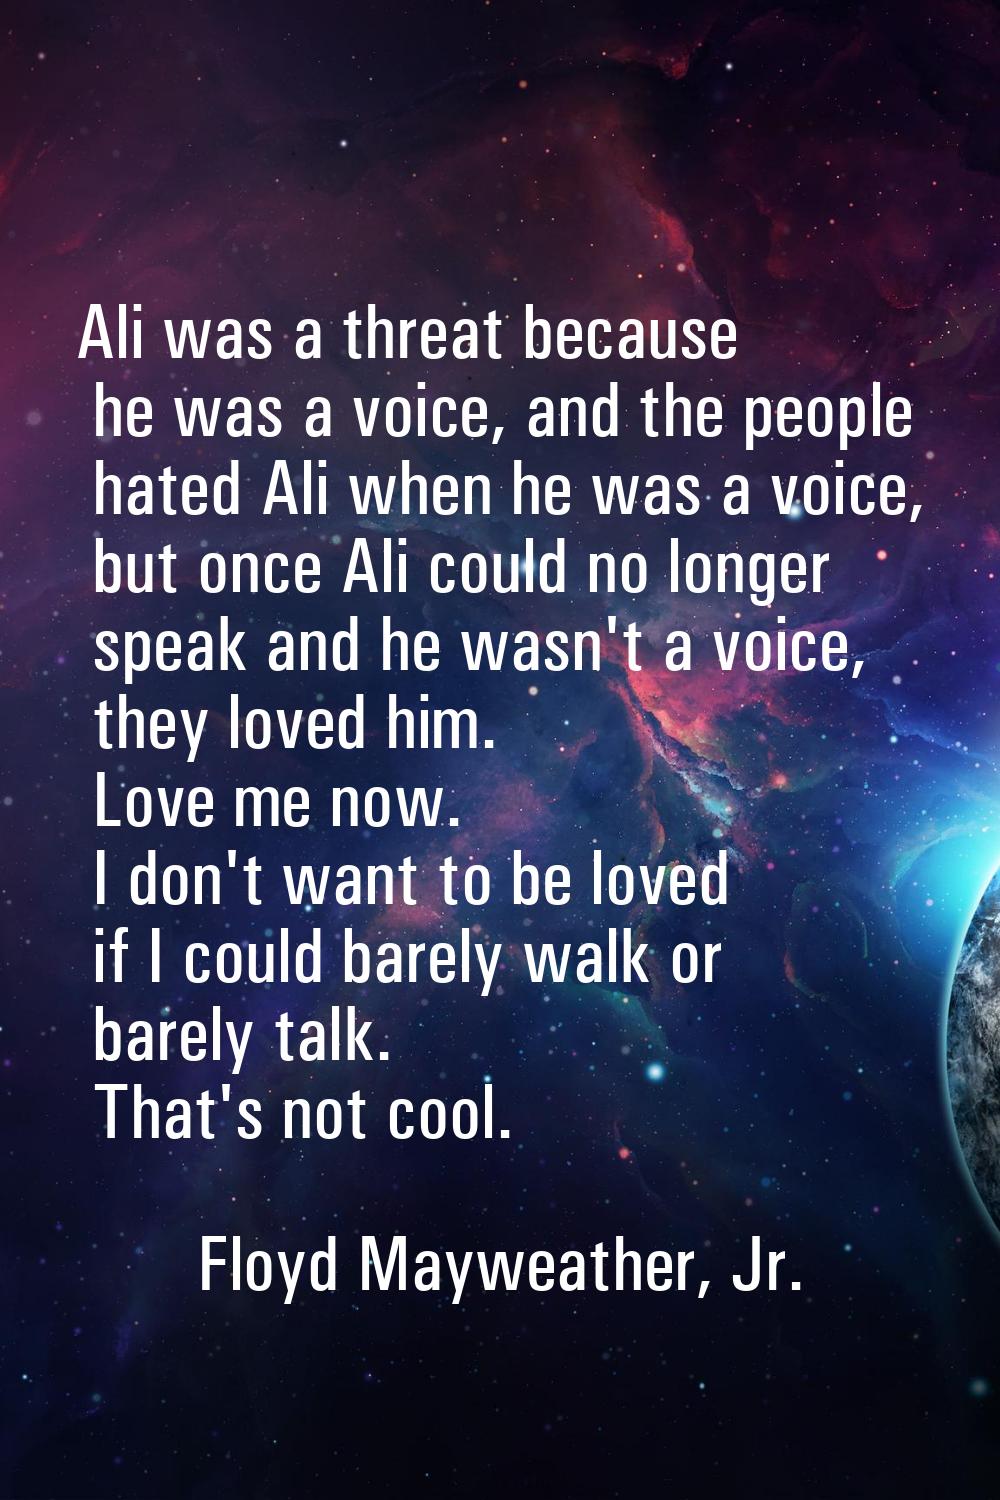 Ali was a threat because he was a voice, and the people hated Ali when he was a voice, but once Ali